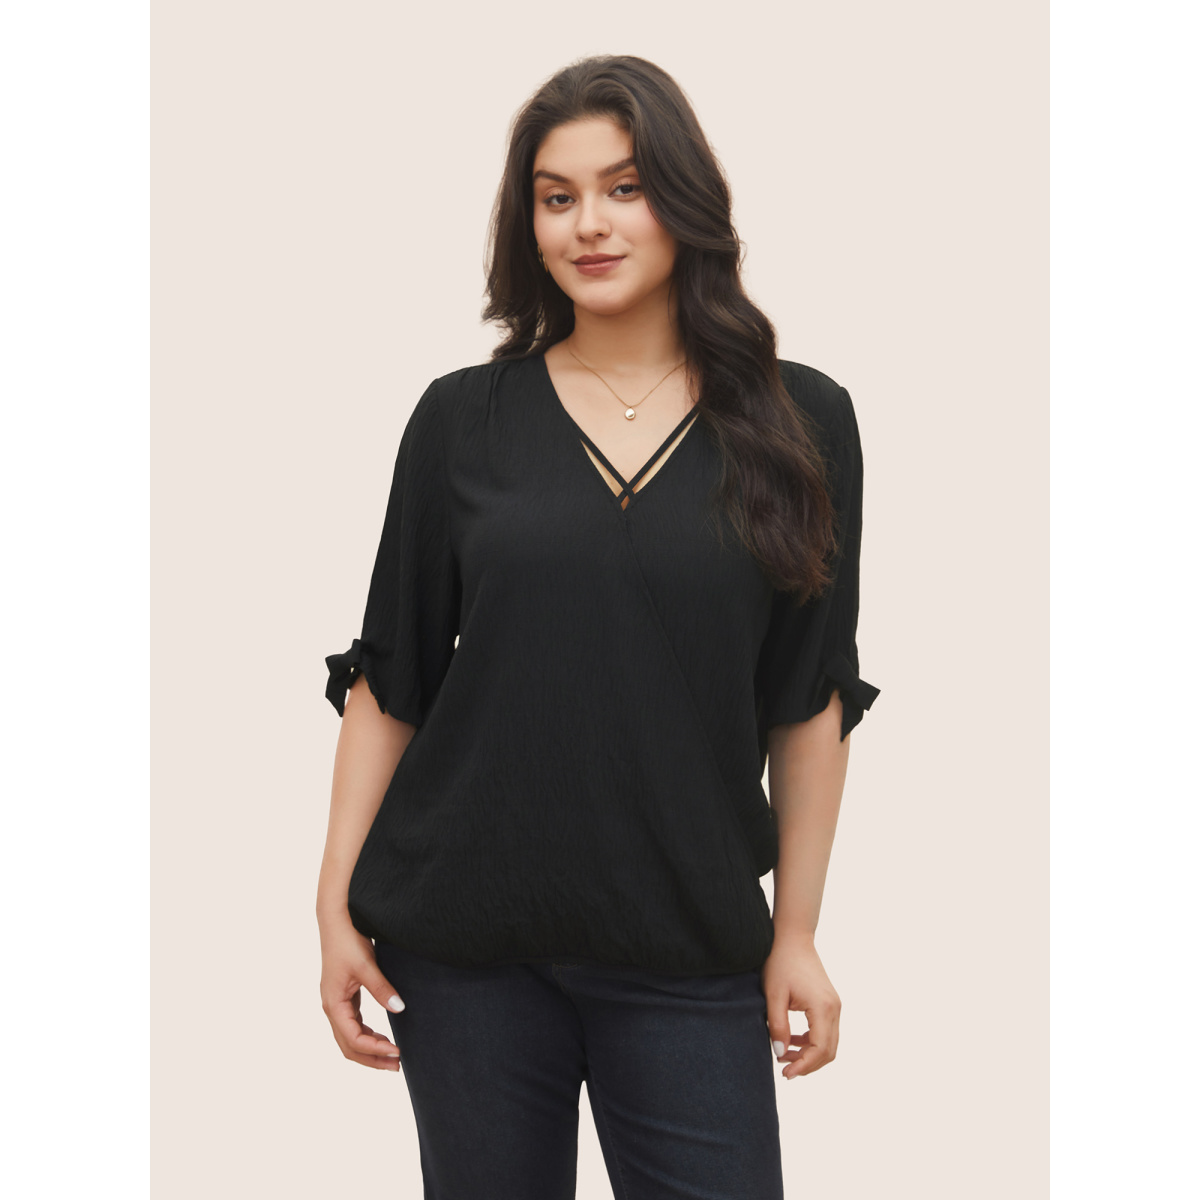 

Plus Size Black Stretchy Woven Bowknot Cut Out Gathered Crisscross Blouse Women At the Office Half Sleeve V-neck Work Blouses BloomChic